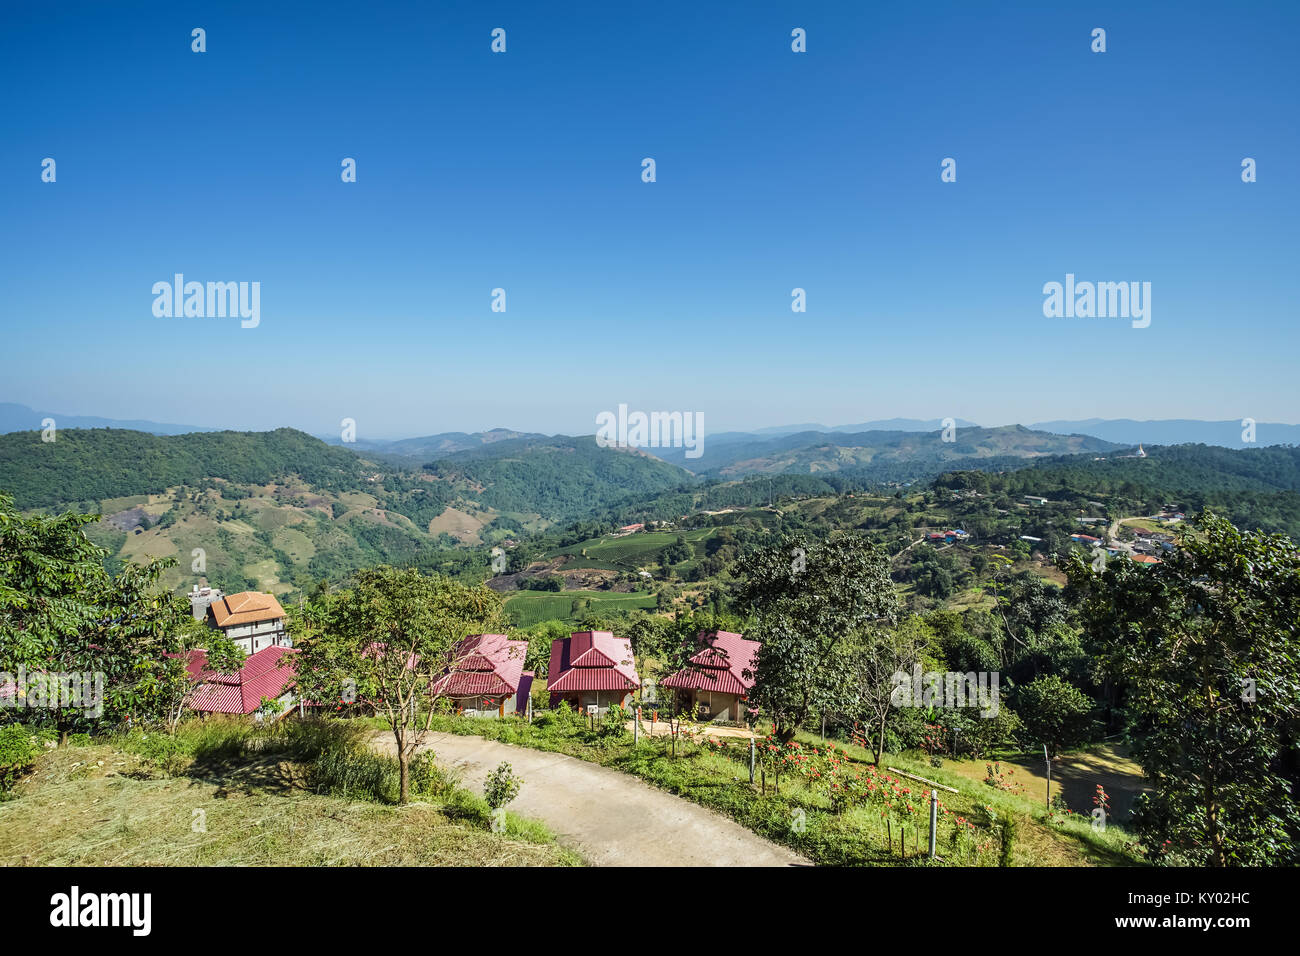 Homes in the mountain with tea plantation blue sky background Stock Photo